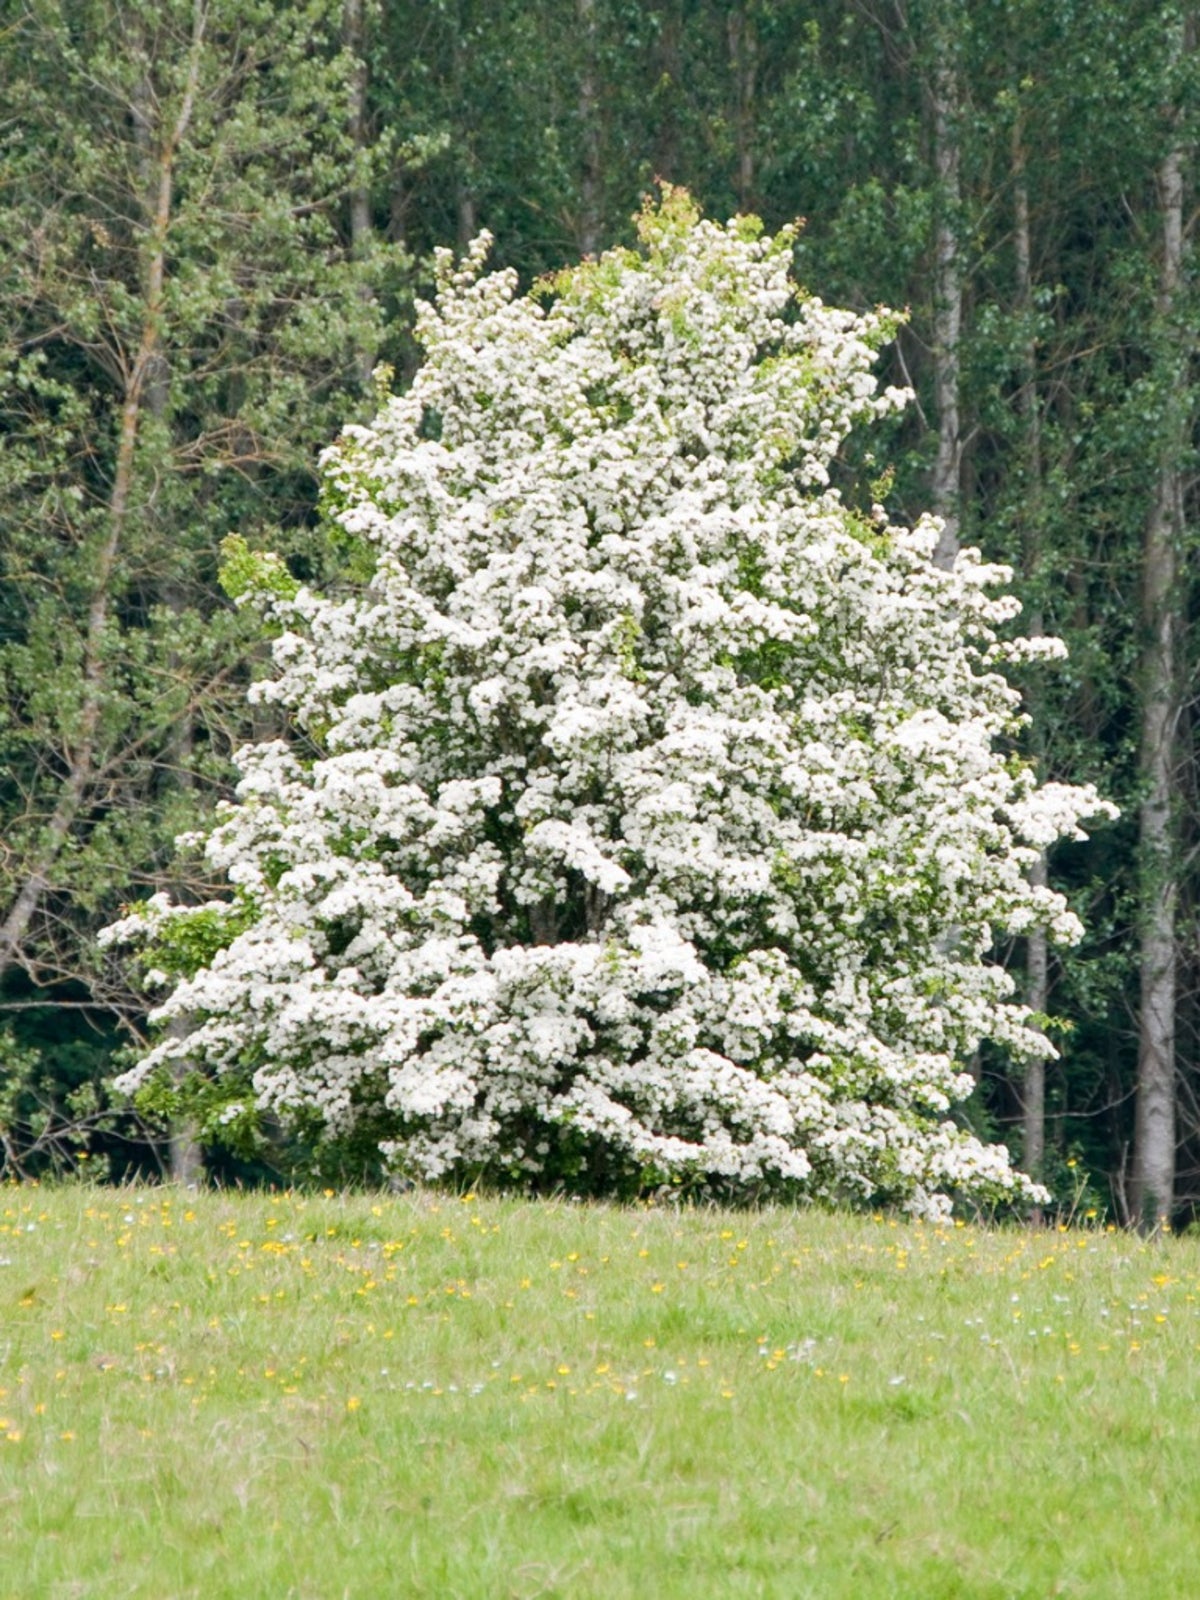 hawthorn tree care - tips for growing hawthorn plants